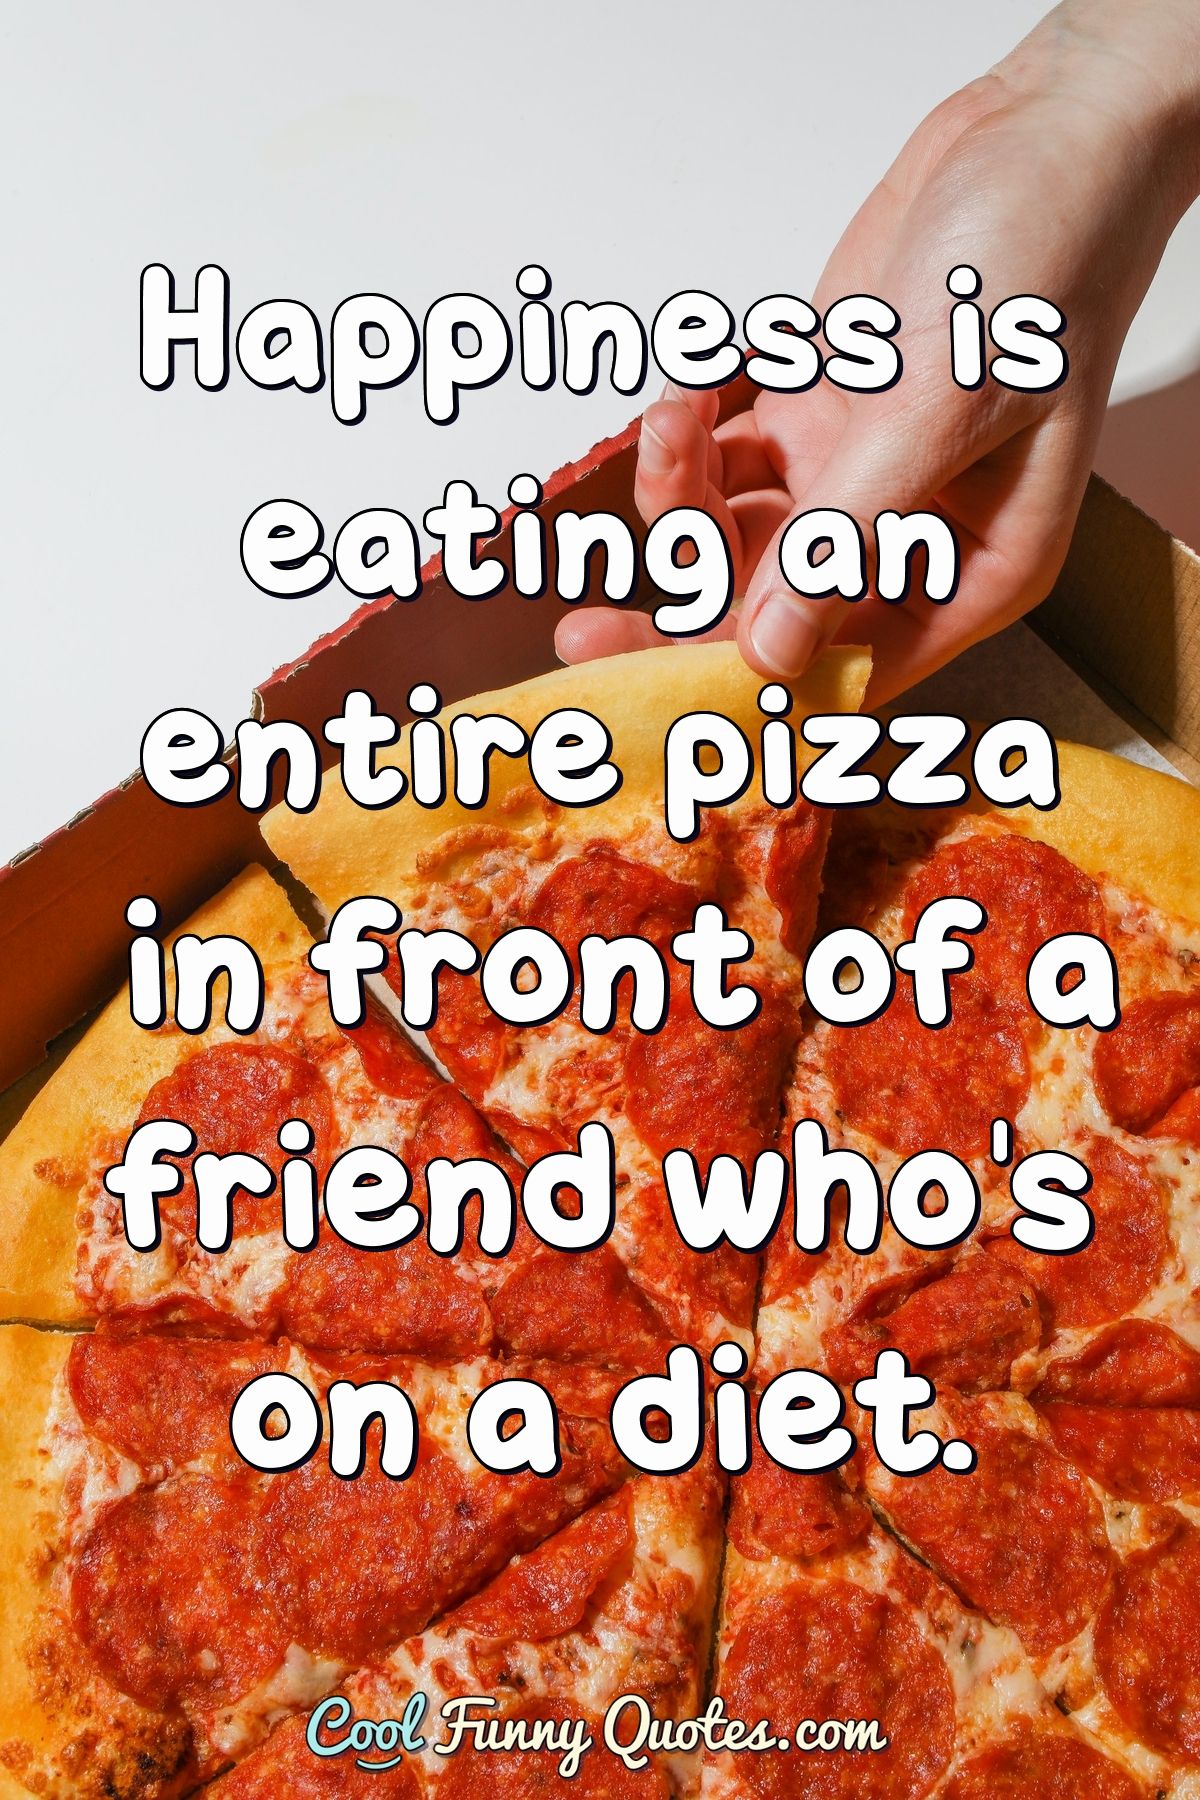 Happiness is eating an entire pizza in front of a friend who's on a diet.